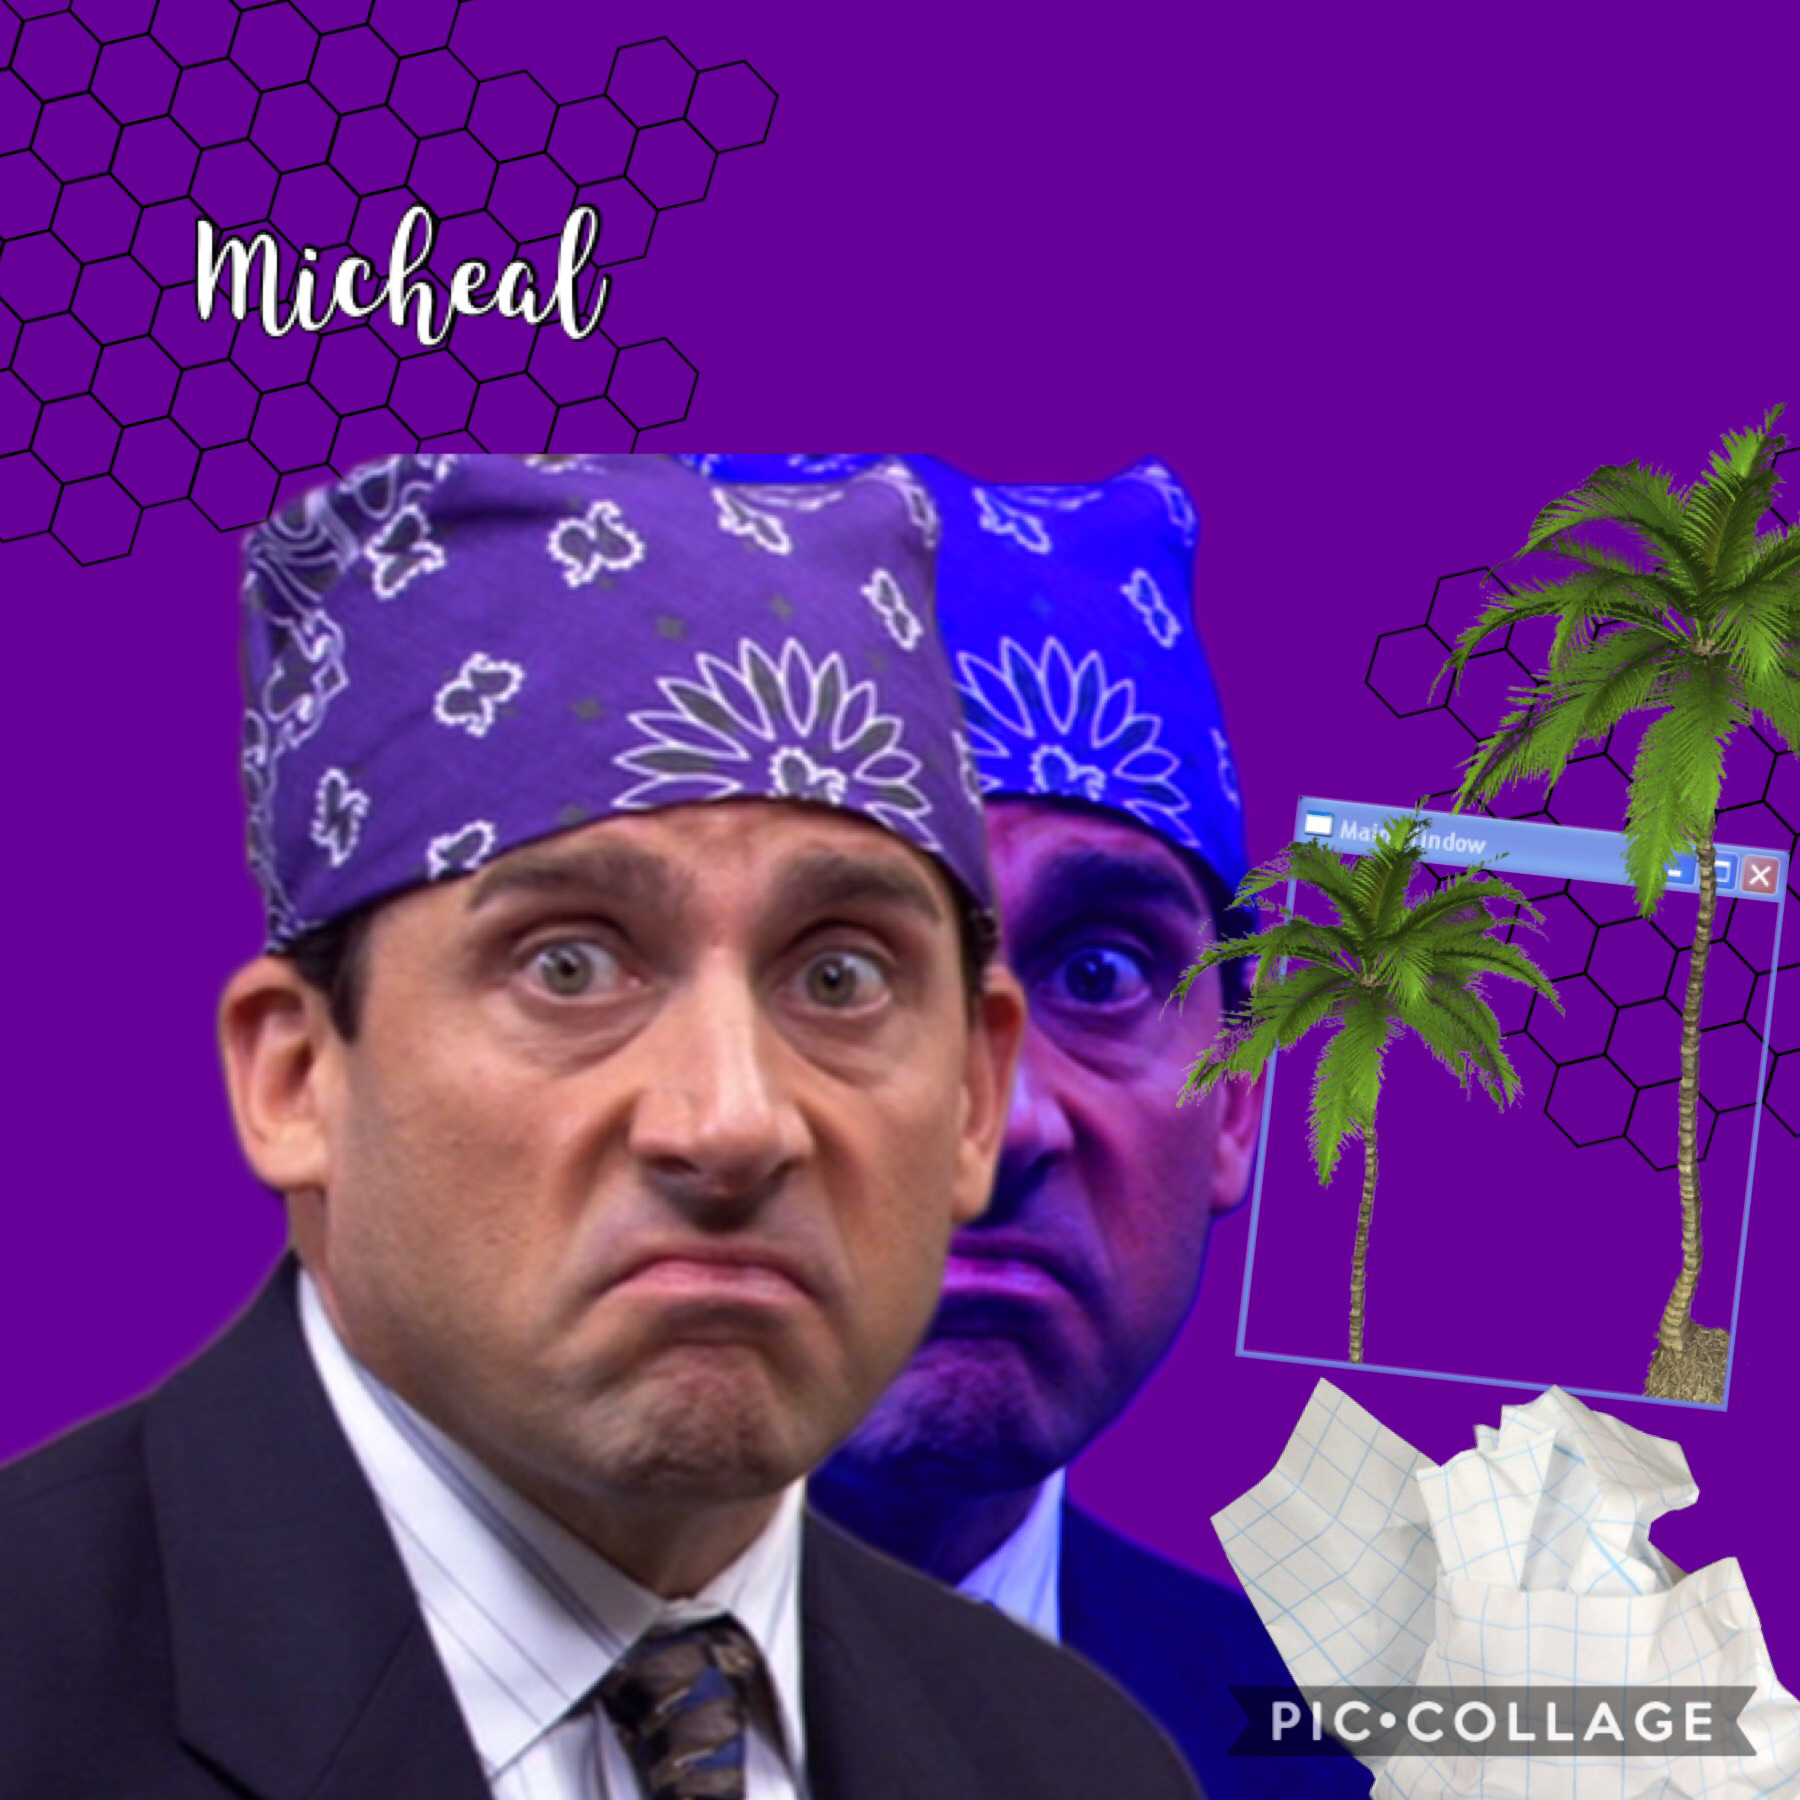 Micheal Scott y’all

-That’s what she said
-I am Beyoncé always
#PrisonMike